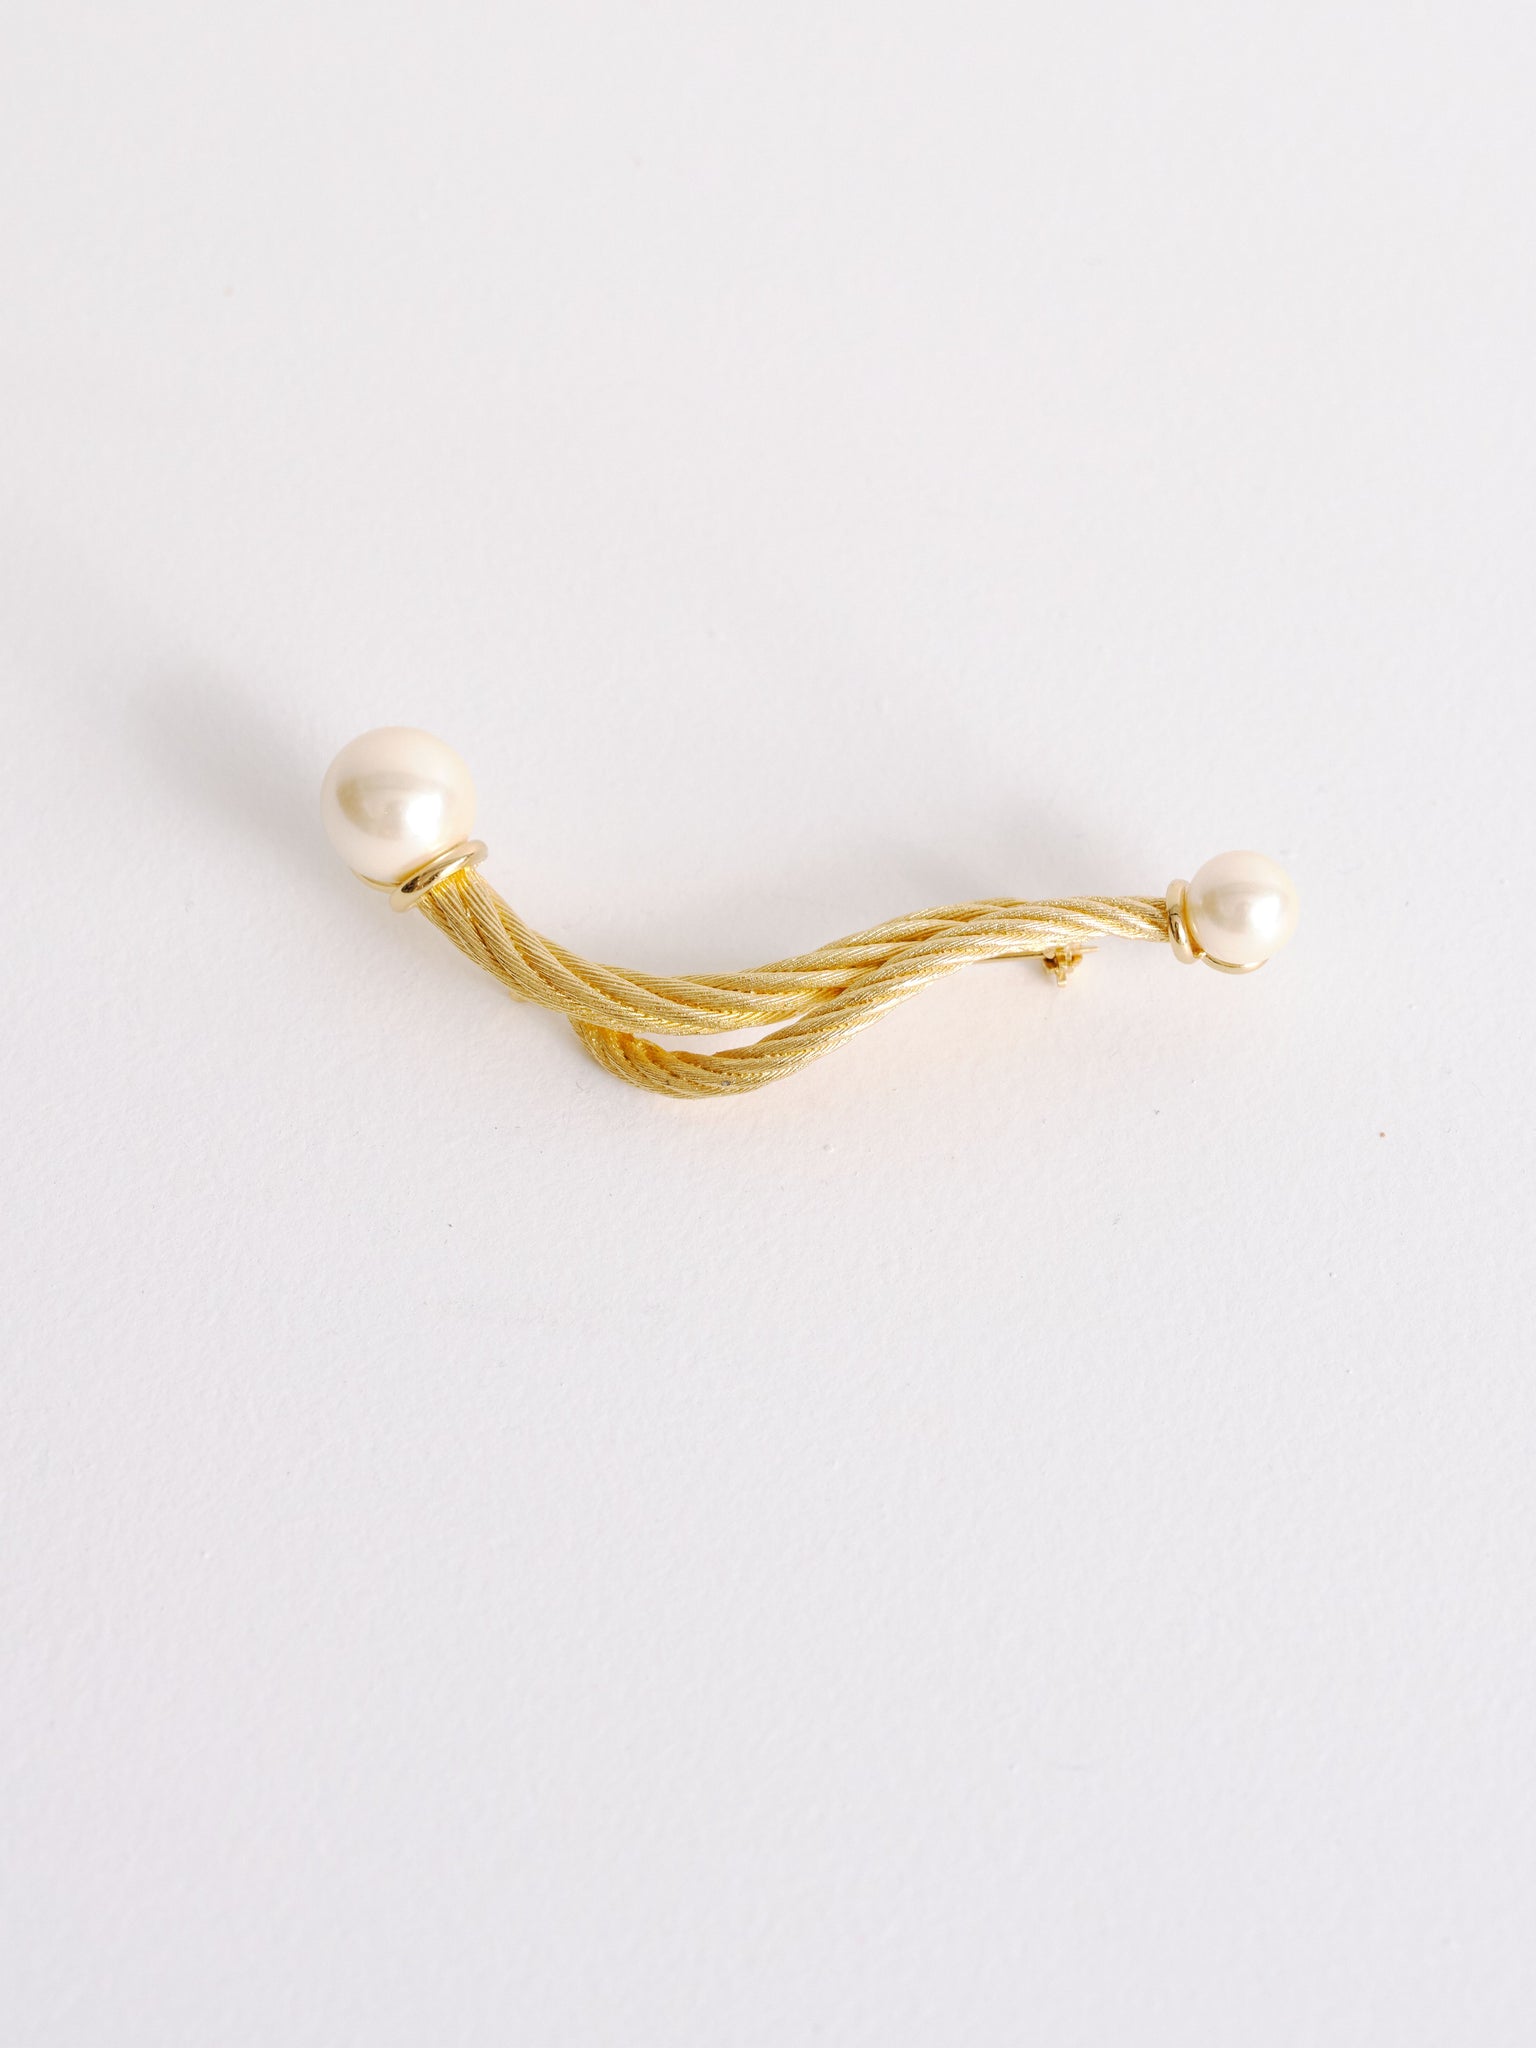 Christian Dior Gold Rope Brooch